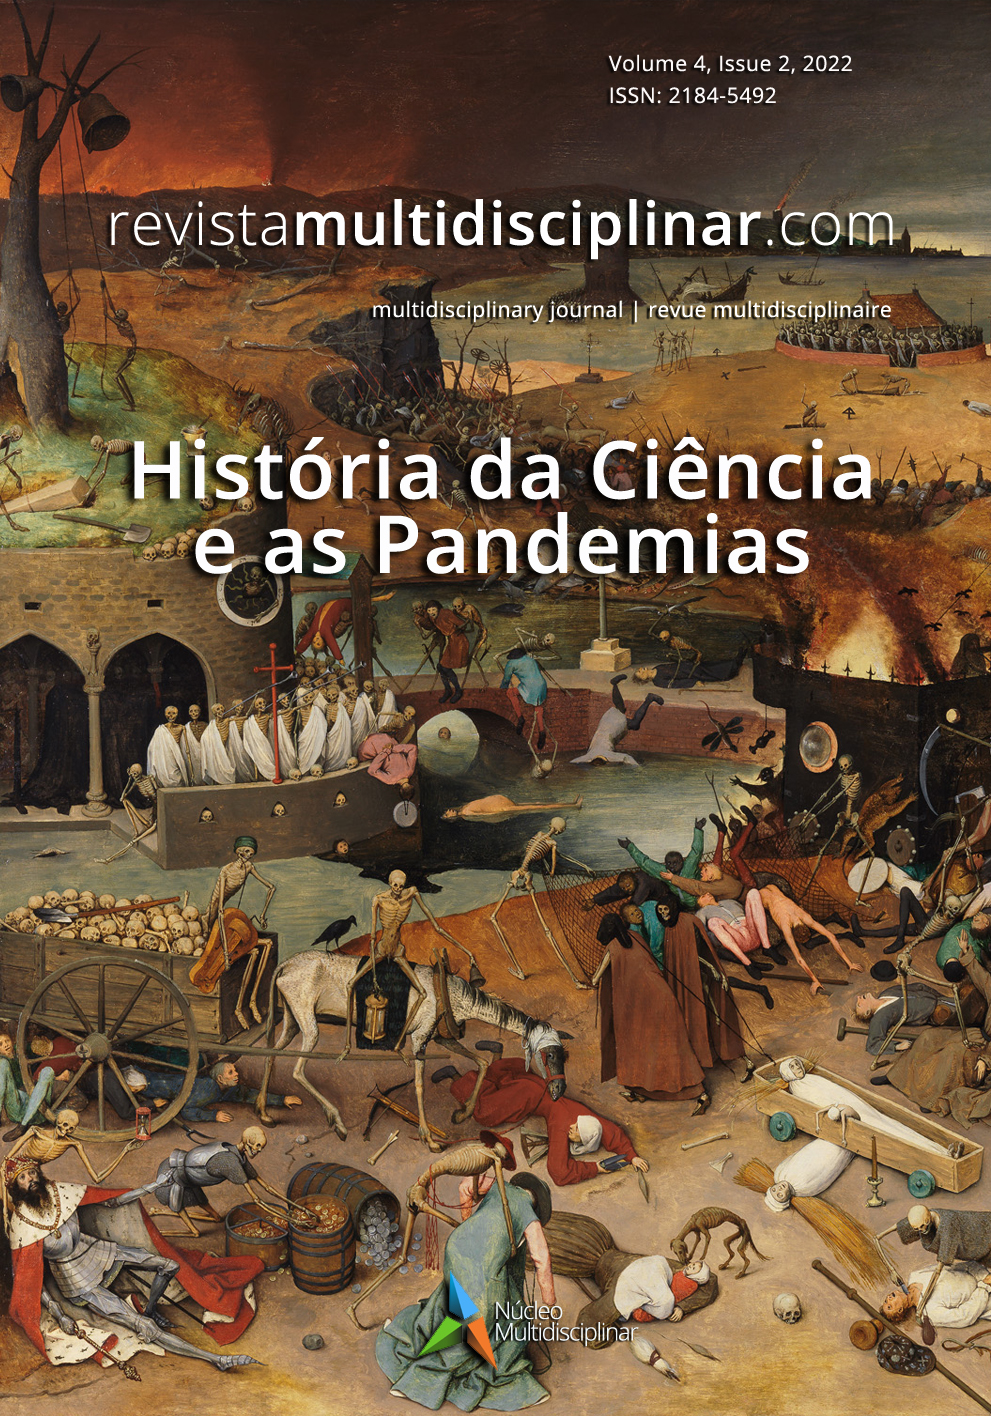 					View Vol. 4 No. 2 (2022): History of Science and Pandemics
				